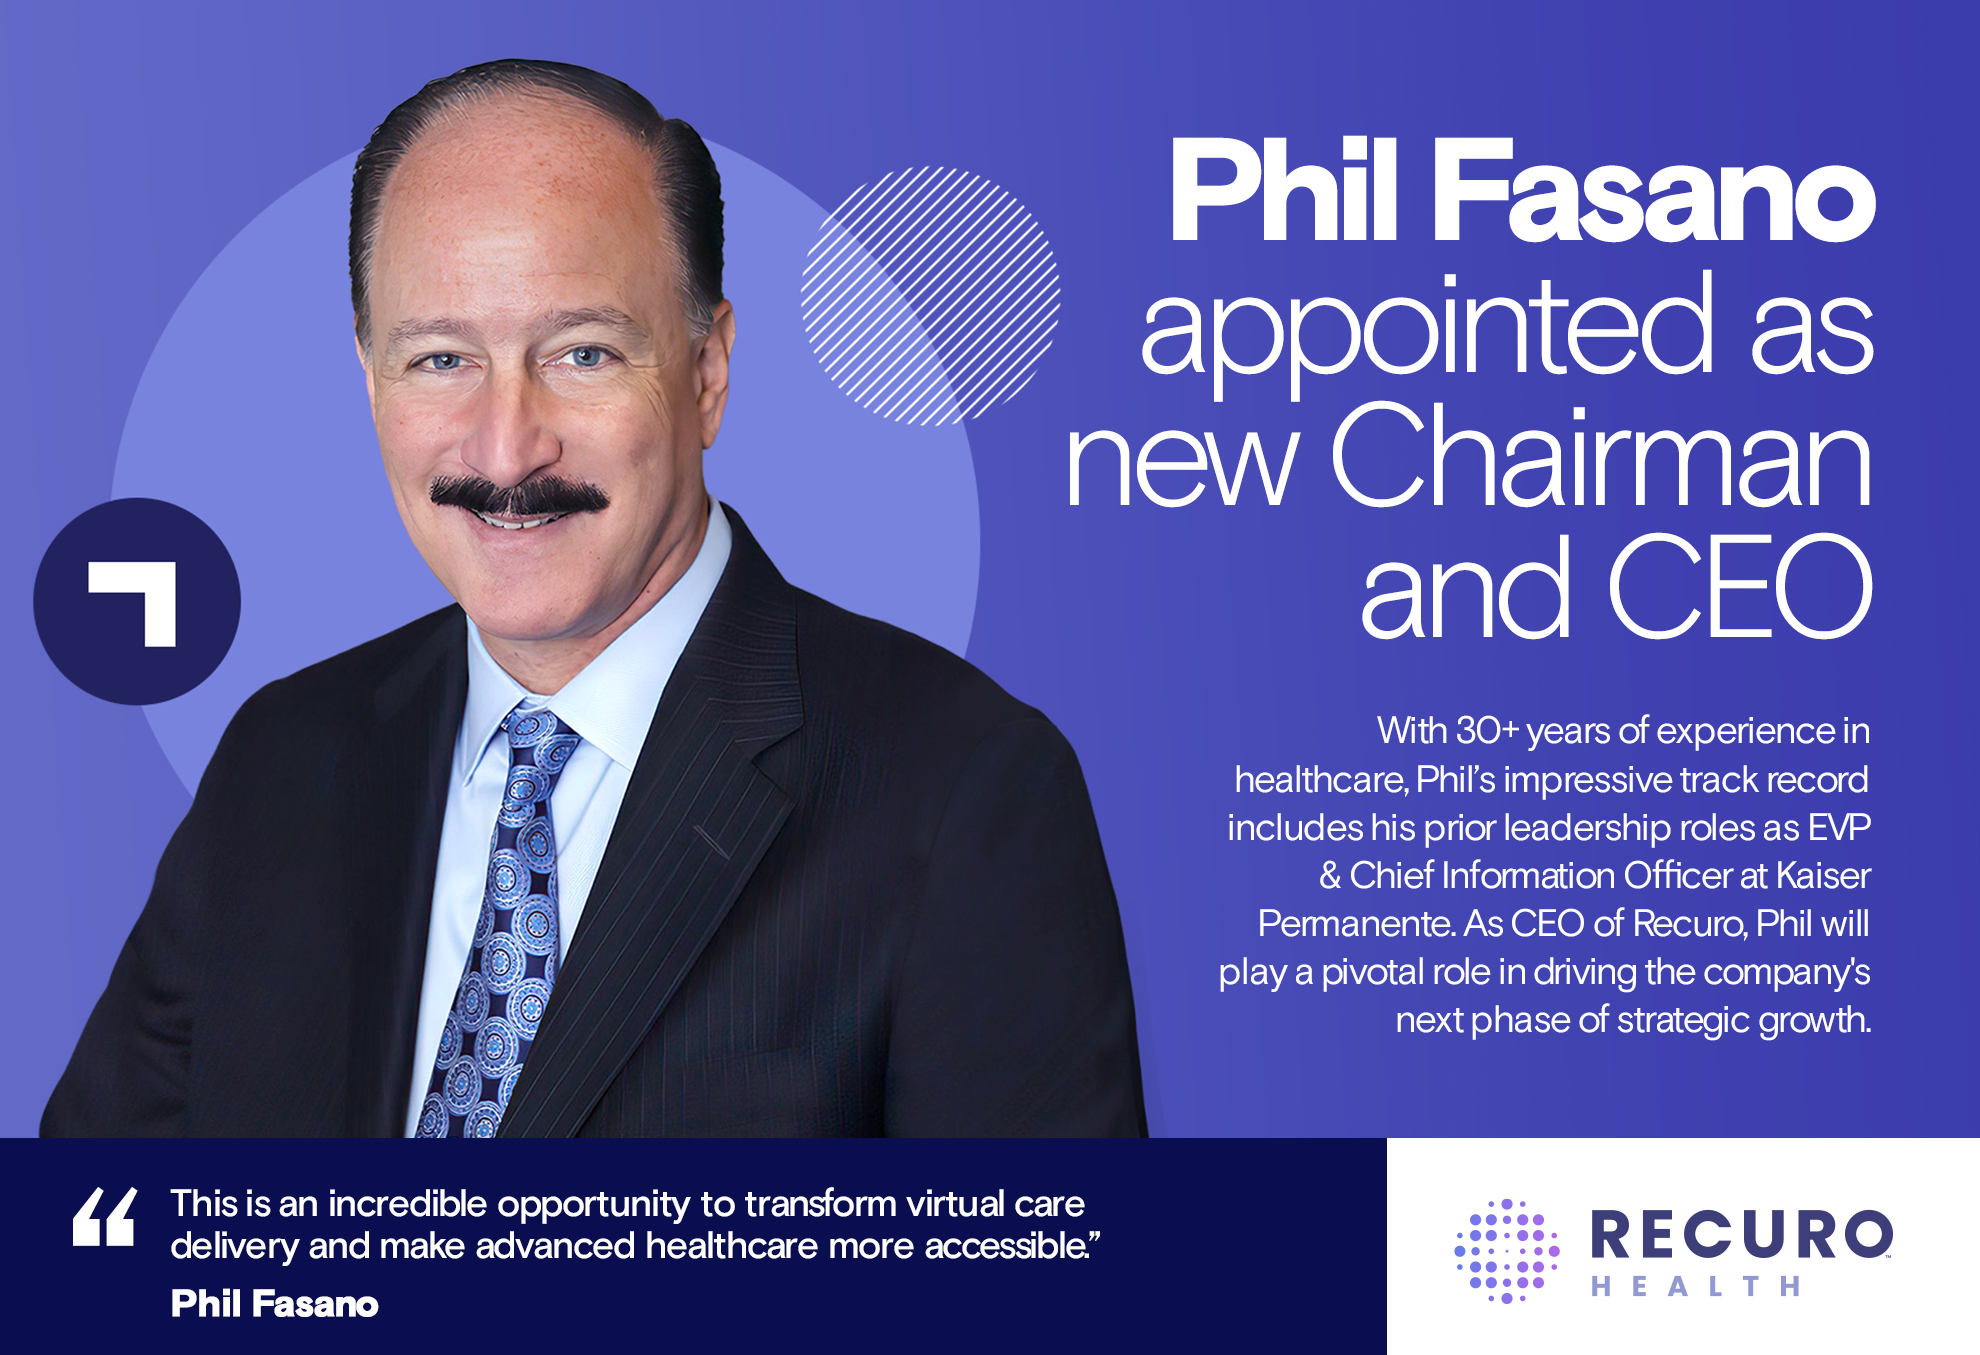 Phil Fasano Appointed CEO of Recuro Health, Driving Next Phase of Rapid Growth and Innovation in Technology and Healthcare